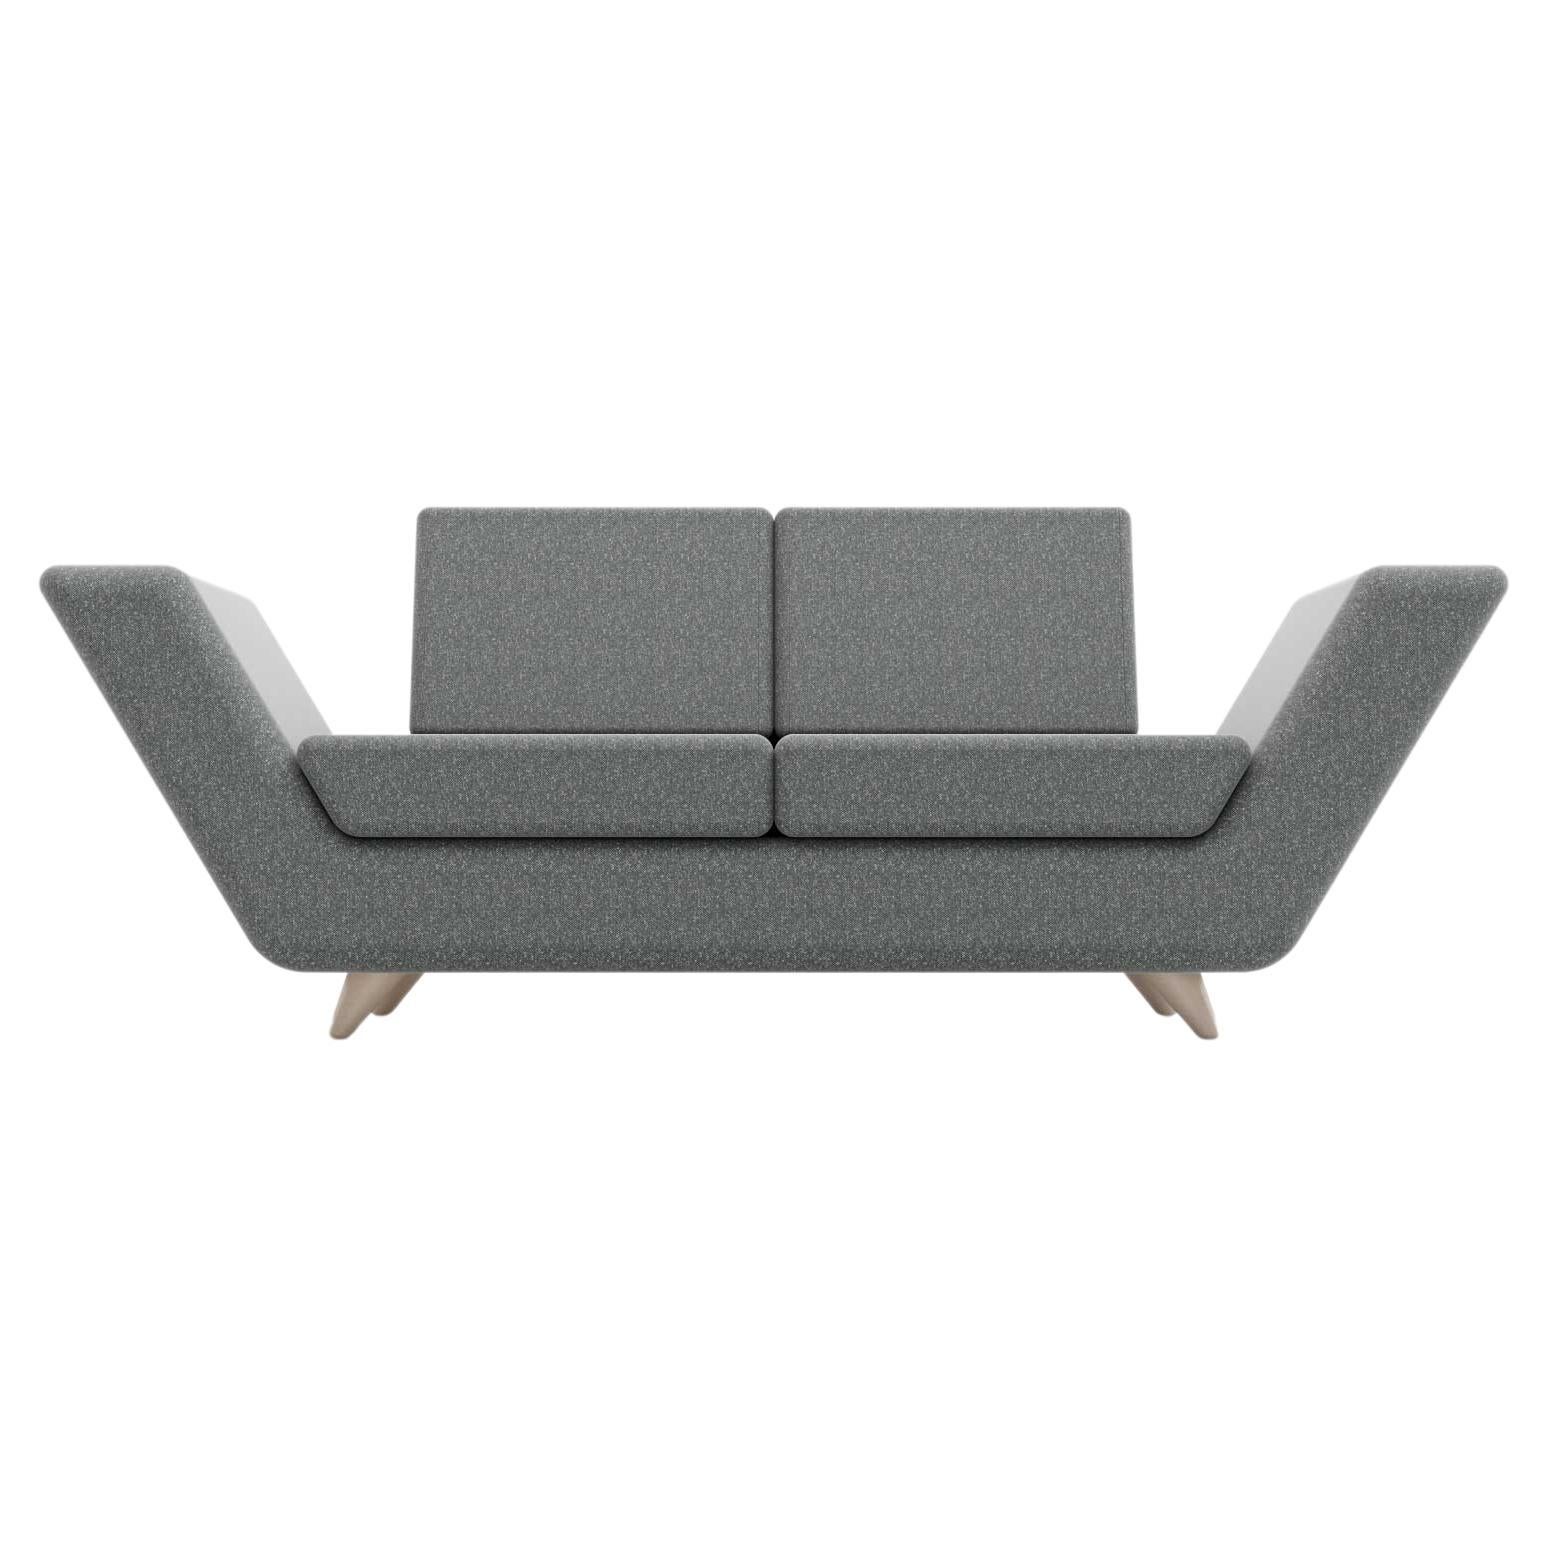 Apex 2 Seat Sofa - Modern Scandinavian Sofa with Wooden Legs For Sale